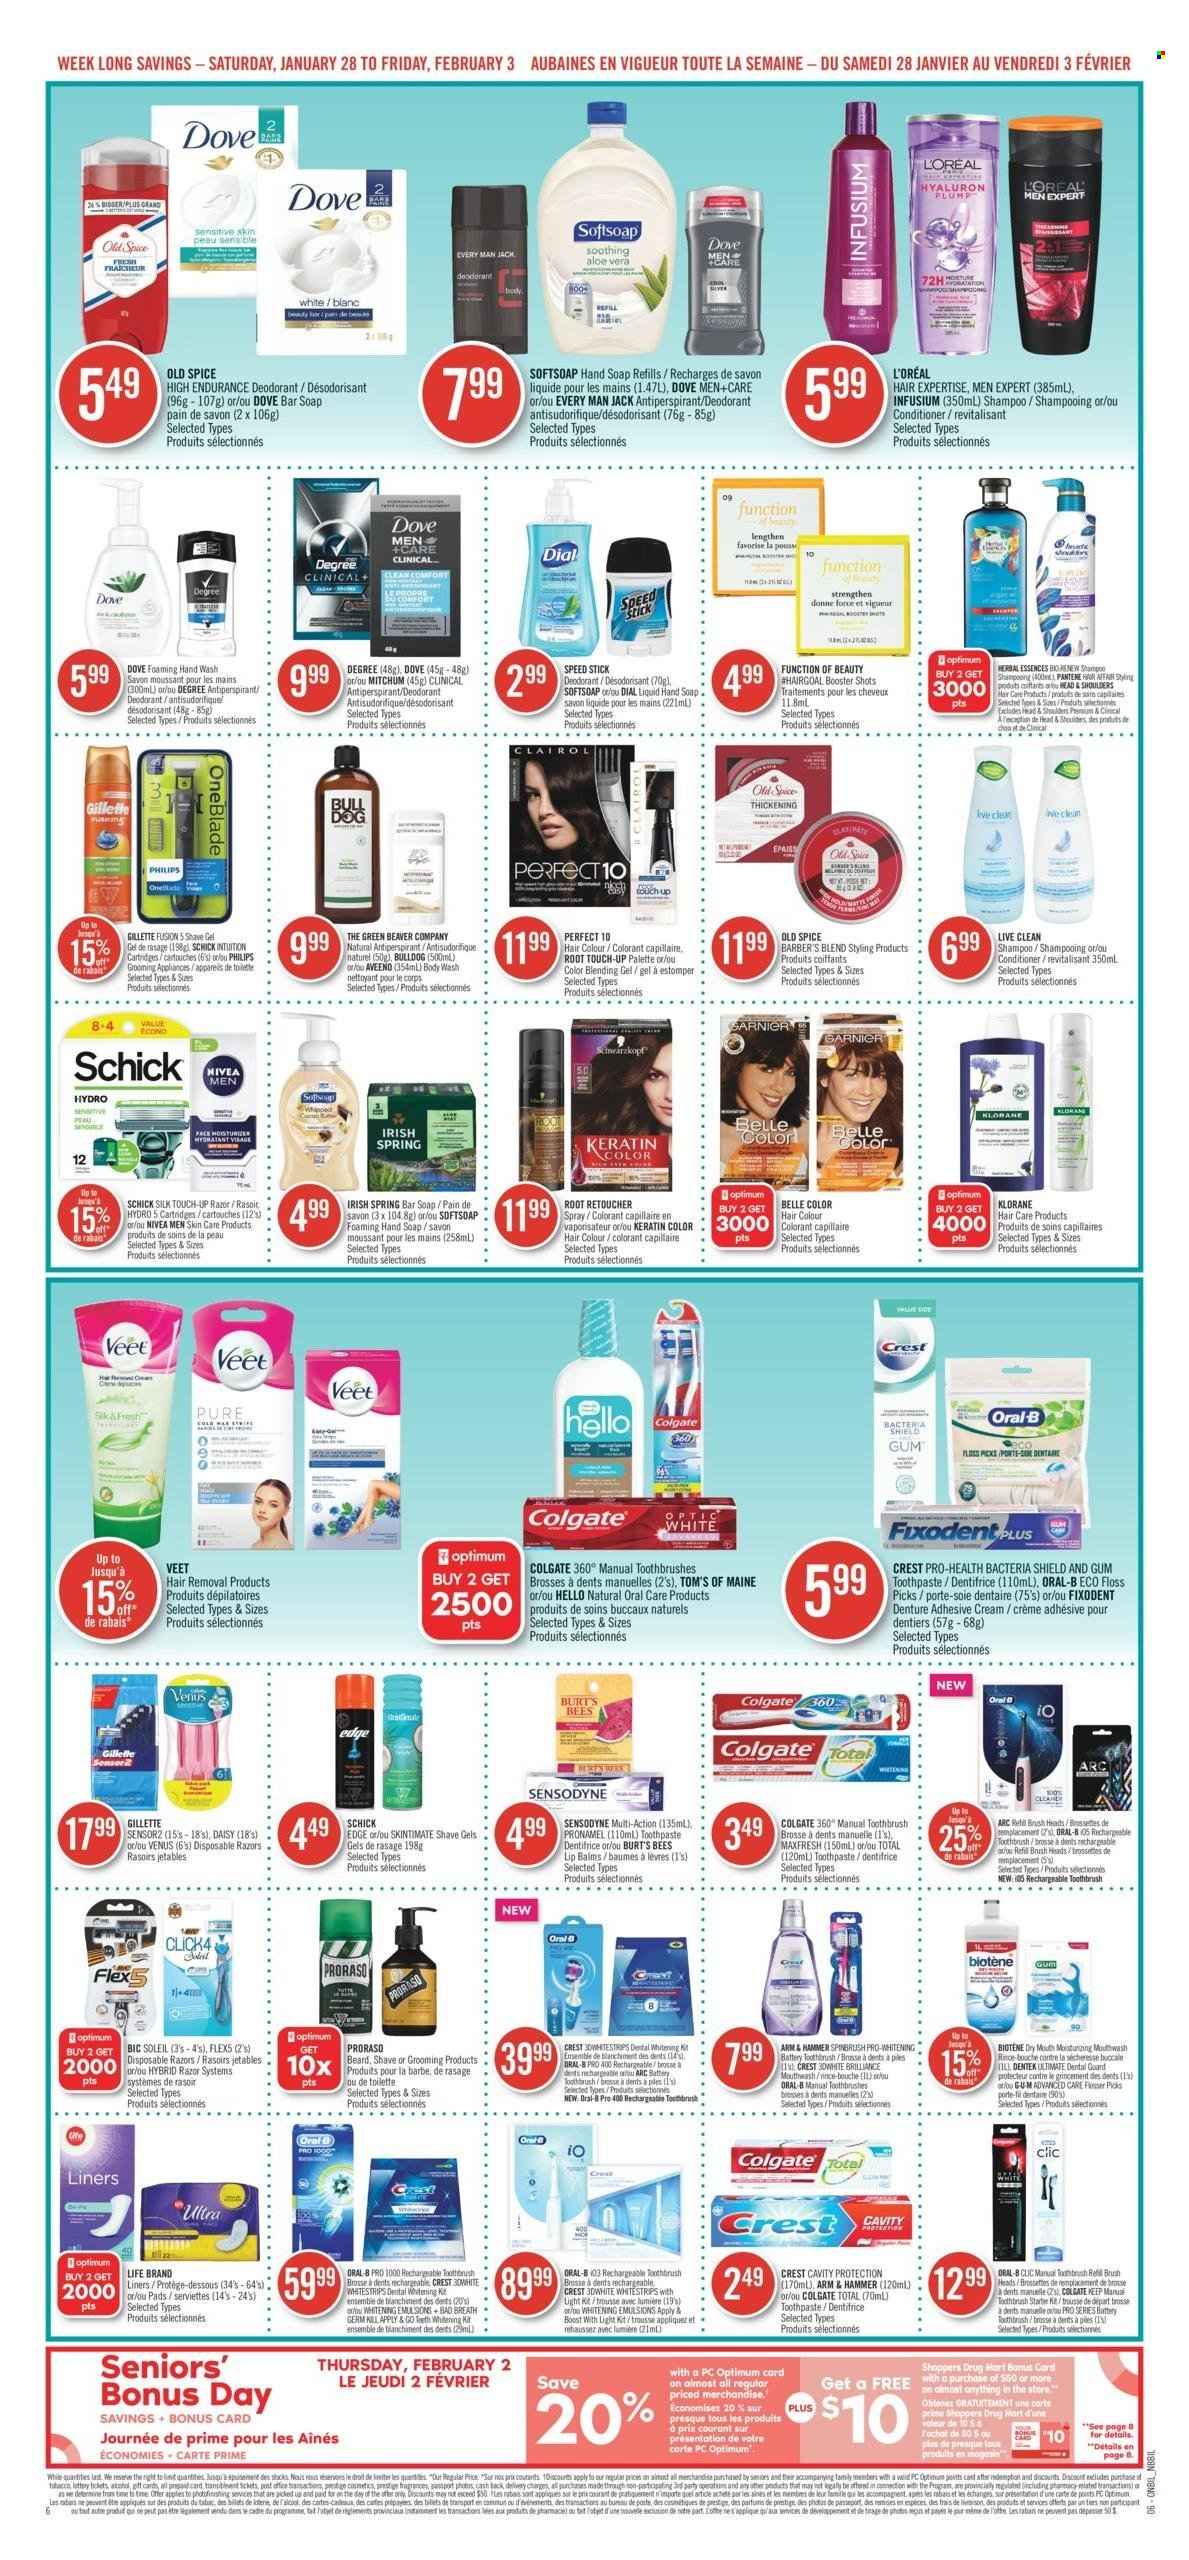 thumbnail - Shoppers Drug Mart Flyer - January 28, 2023 - February 03, 2023 - Sales products - Philips, Silk, Dove, ARM & HAMMER, spice, Boost, Aveeno, Nivea, body wash, Softsoap, hand soap, hand wash, soap bar, Dial, soap, Biotene, toothbrush, toothpaste, mouthwash, Fixodent, Crest, Gillette, L’Oréal, Root Touch-Up, conditioner, Head & Shoulders, Palette, Pantene, hair color, Herbal Essences, keratin, Klorane, anti-perspirant, Speed Stick, BIC, razor, shave gel, Schick, Venus, hair removal, Veet, disposable razor, pot, battery, Optimum, Colgate, Garnier, shampoo, Old Spice, Oral-B, Sensodyne, deodorant. Page 11.